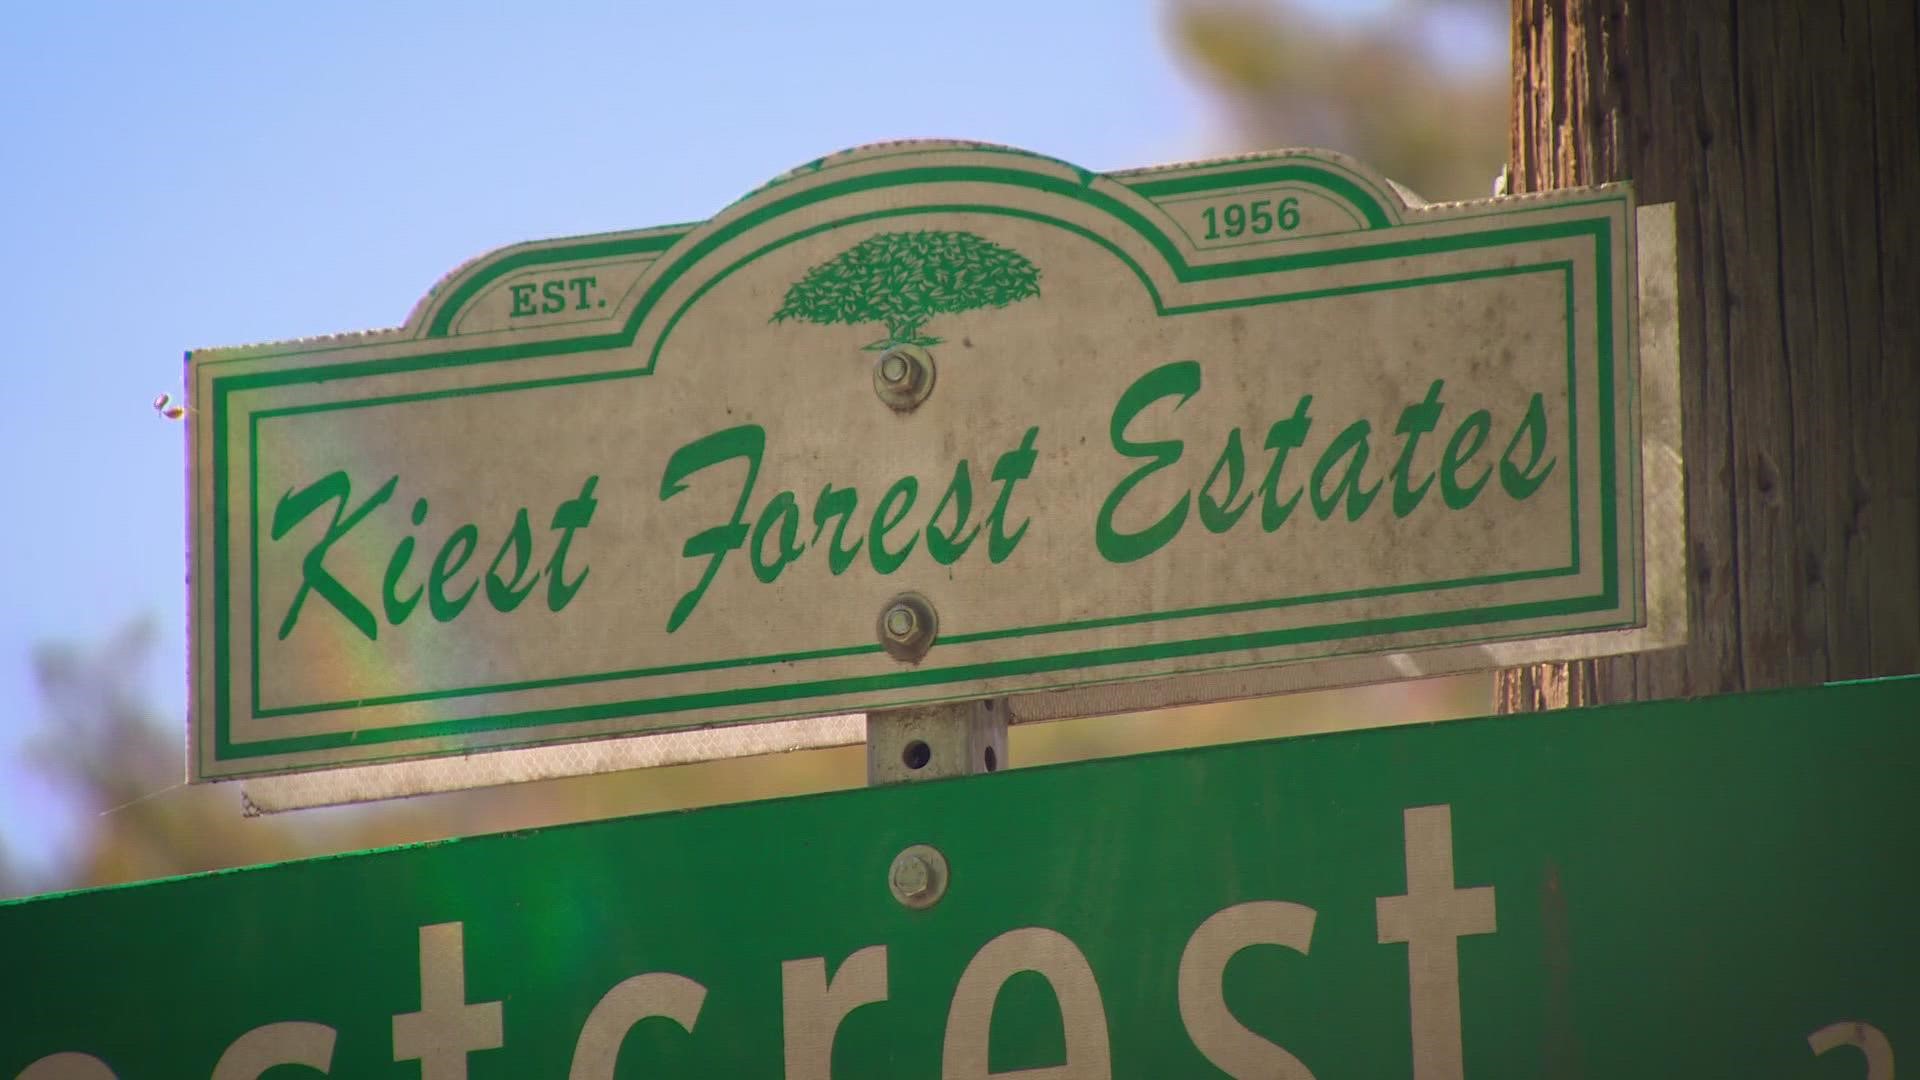 Residents in Kiest Forest Estates say a developer is placing "For Rent" signs around a subdivision where they were told homes would be for sale.